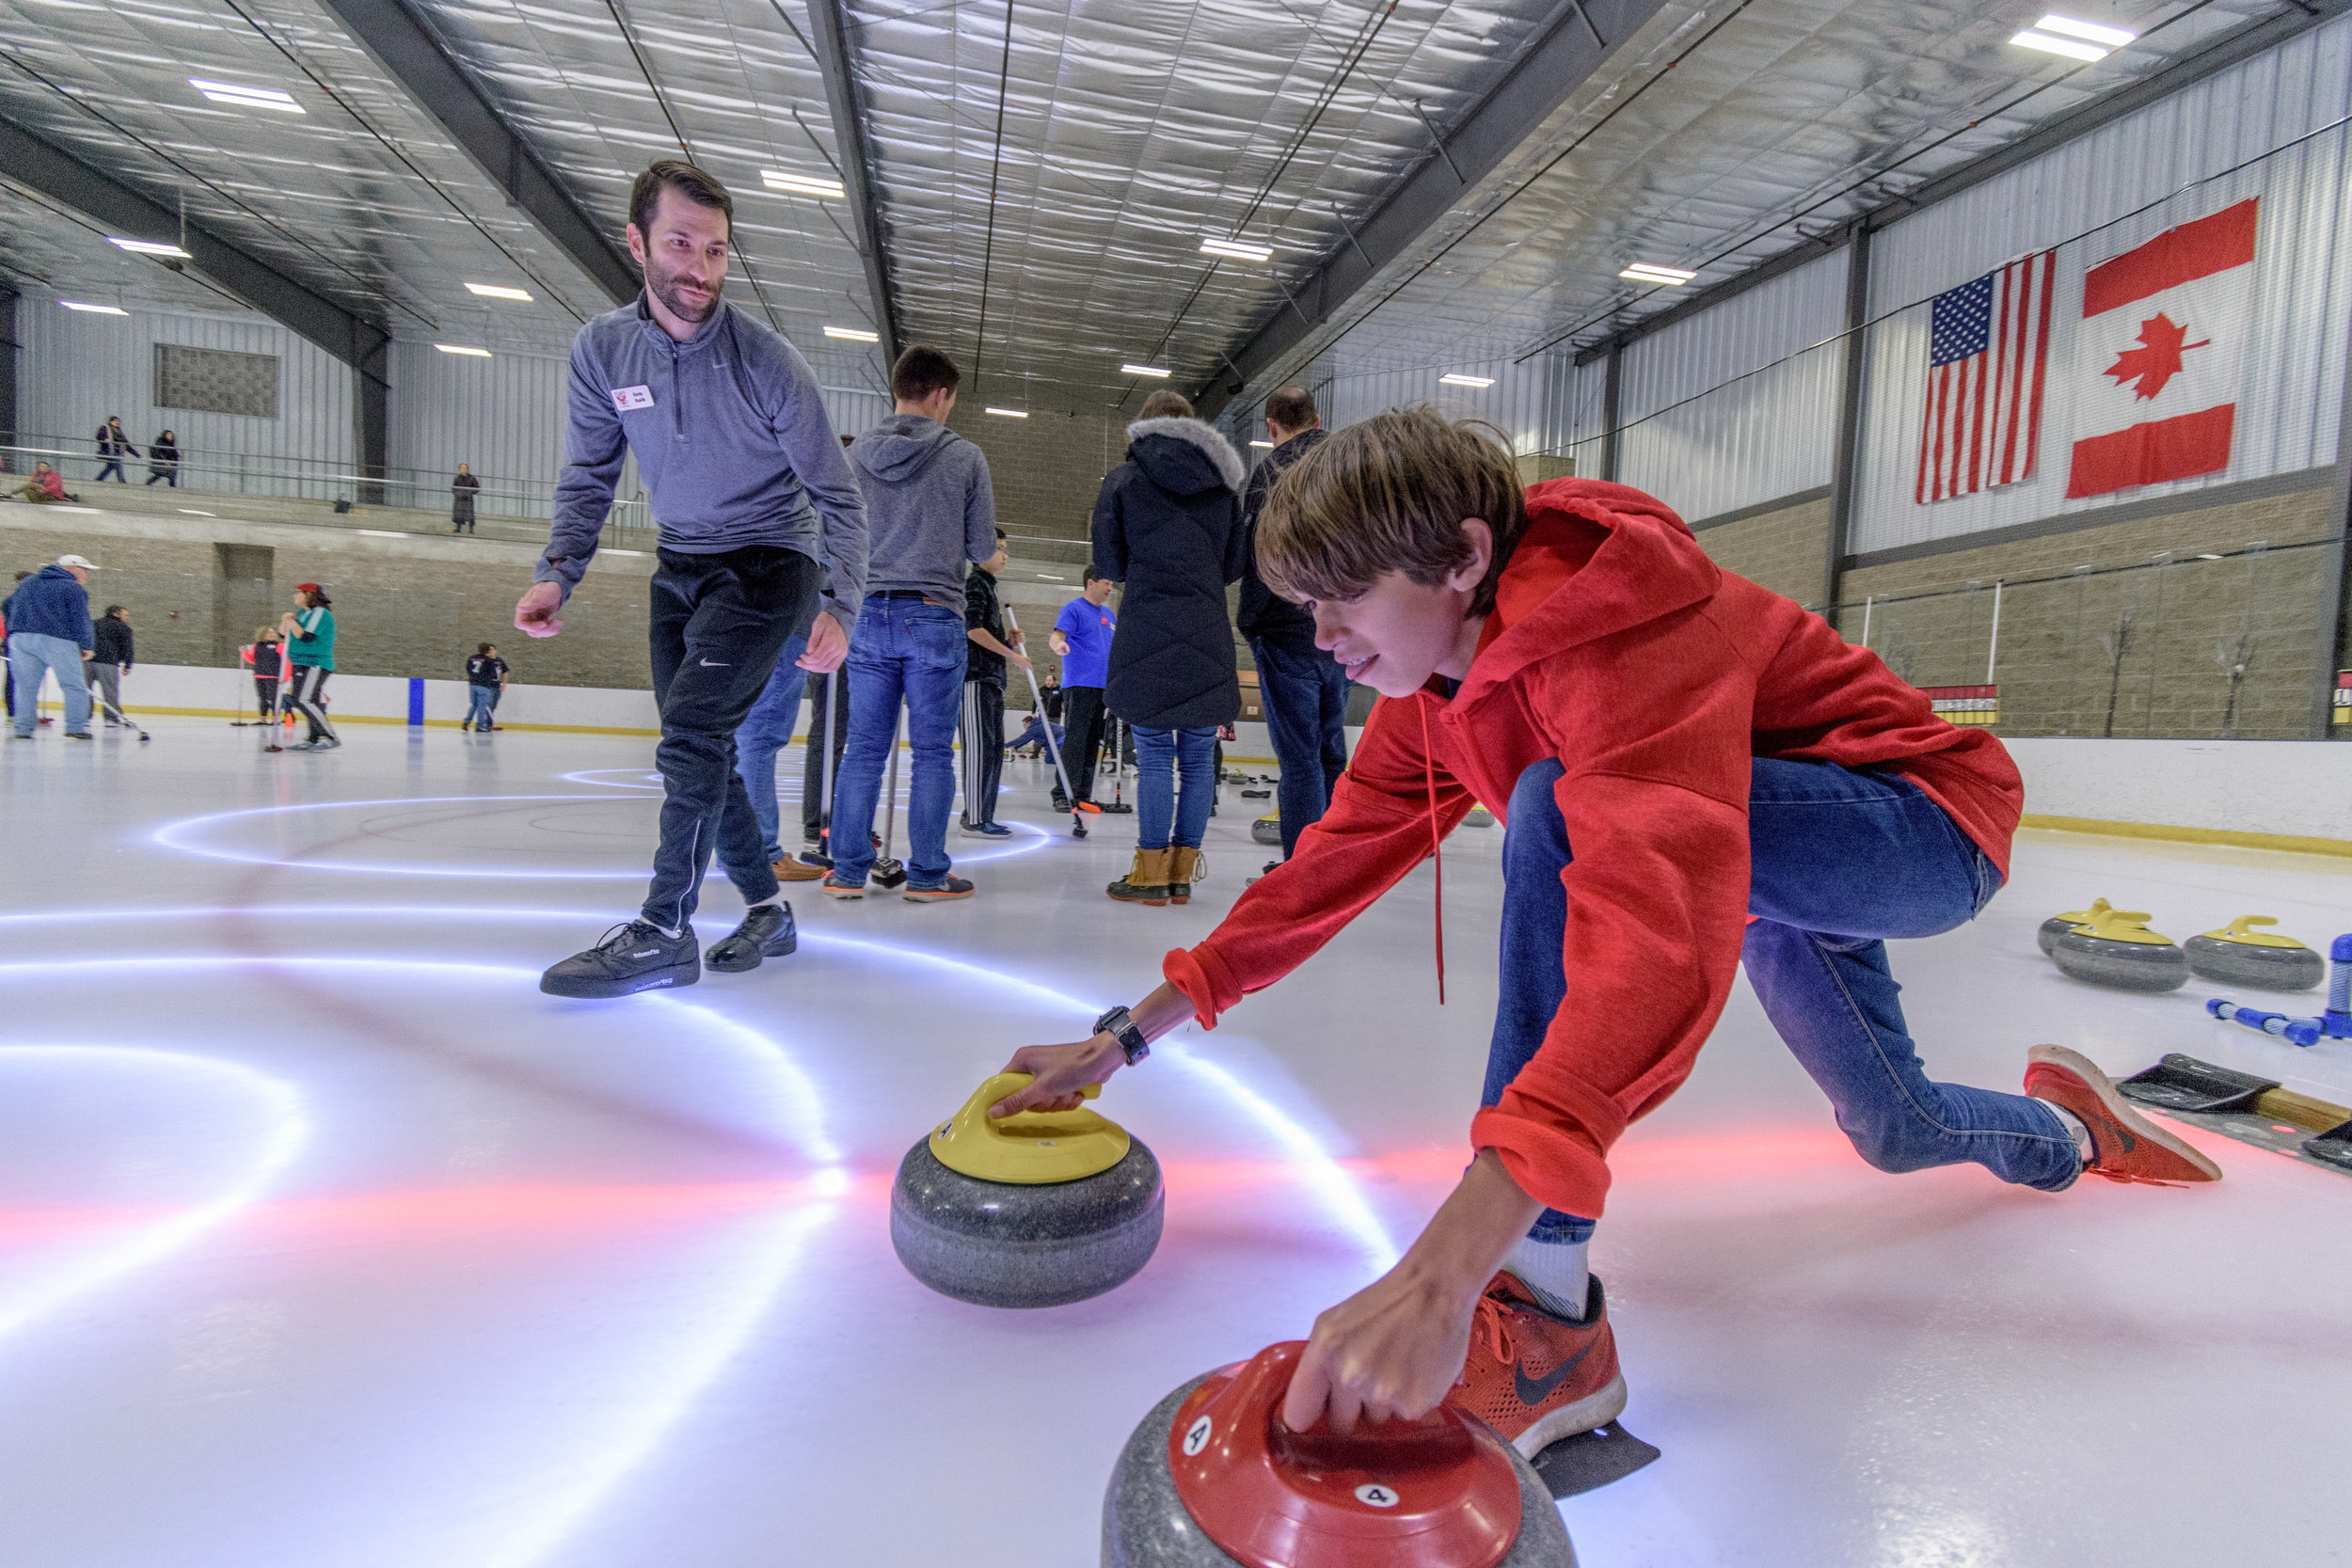 Atlanta Curling Club lesson at Center Ice Arena with LED lights